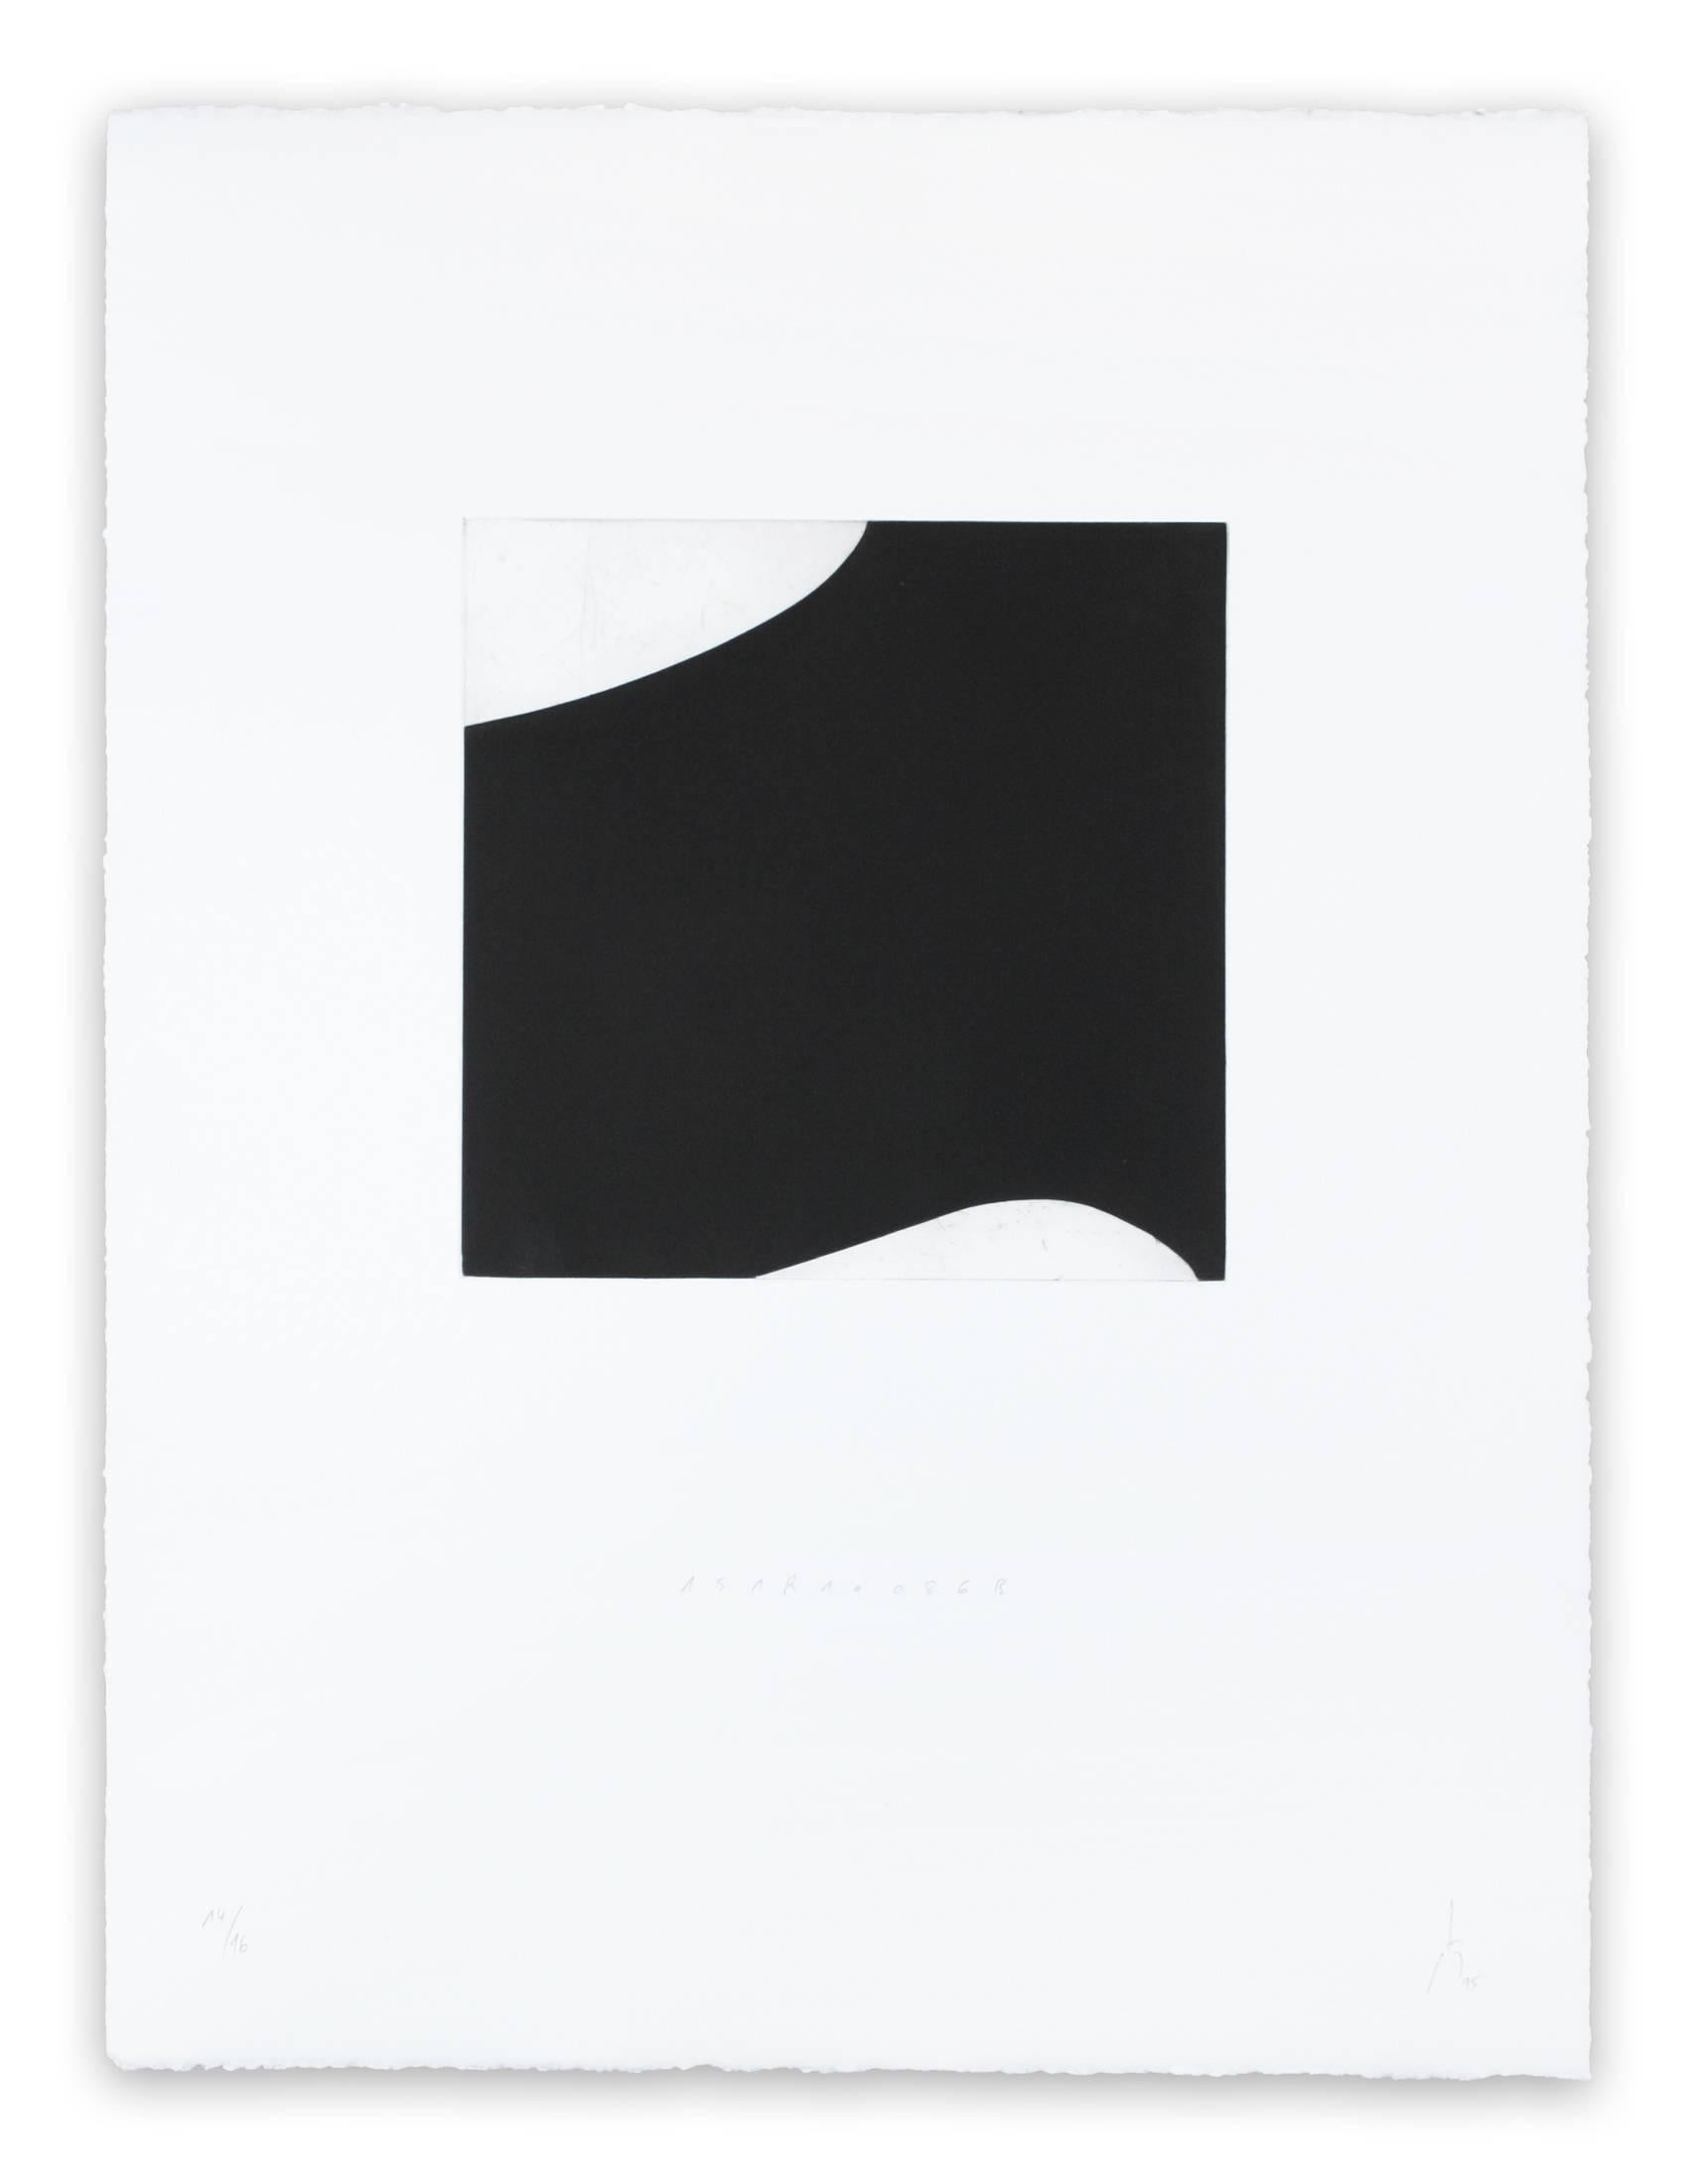 15.6 - Gray Abstract Print by Pierre Muckensturm